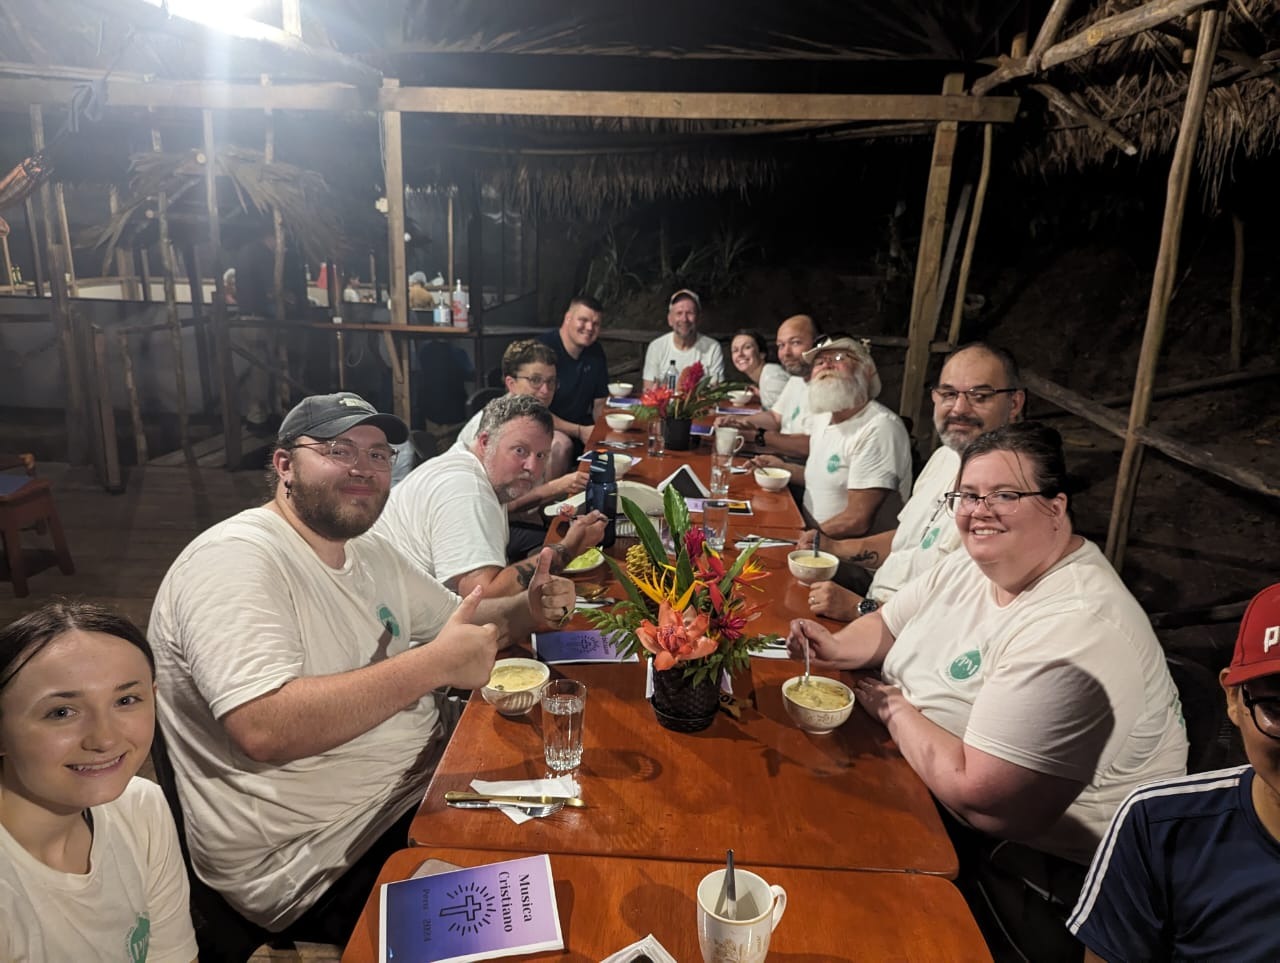 Dinner in the Jungle Lodge